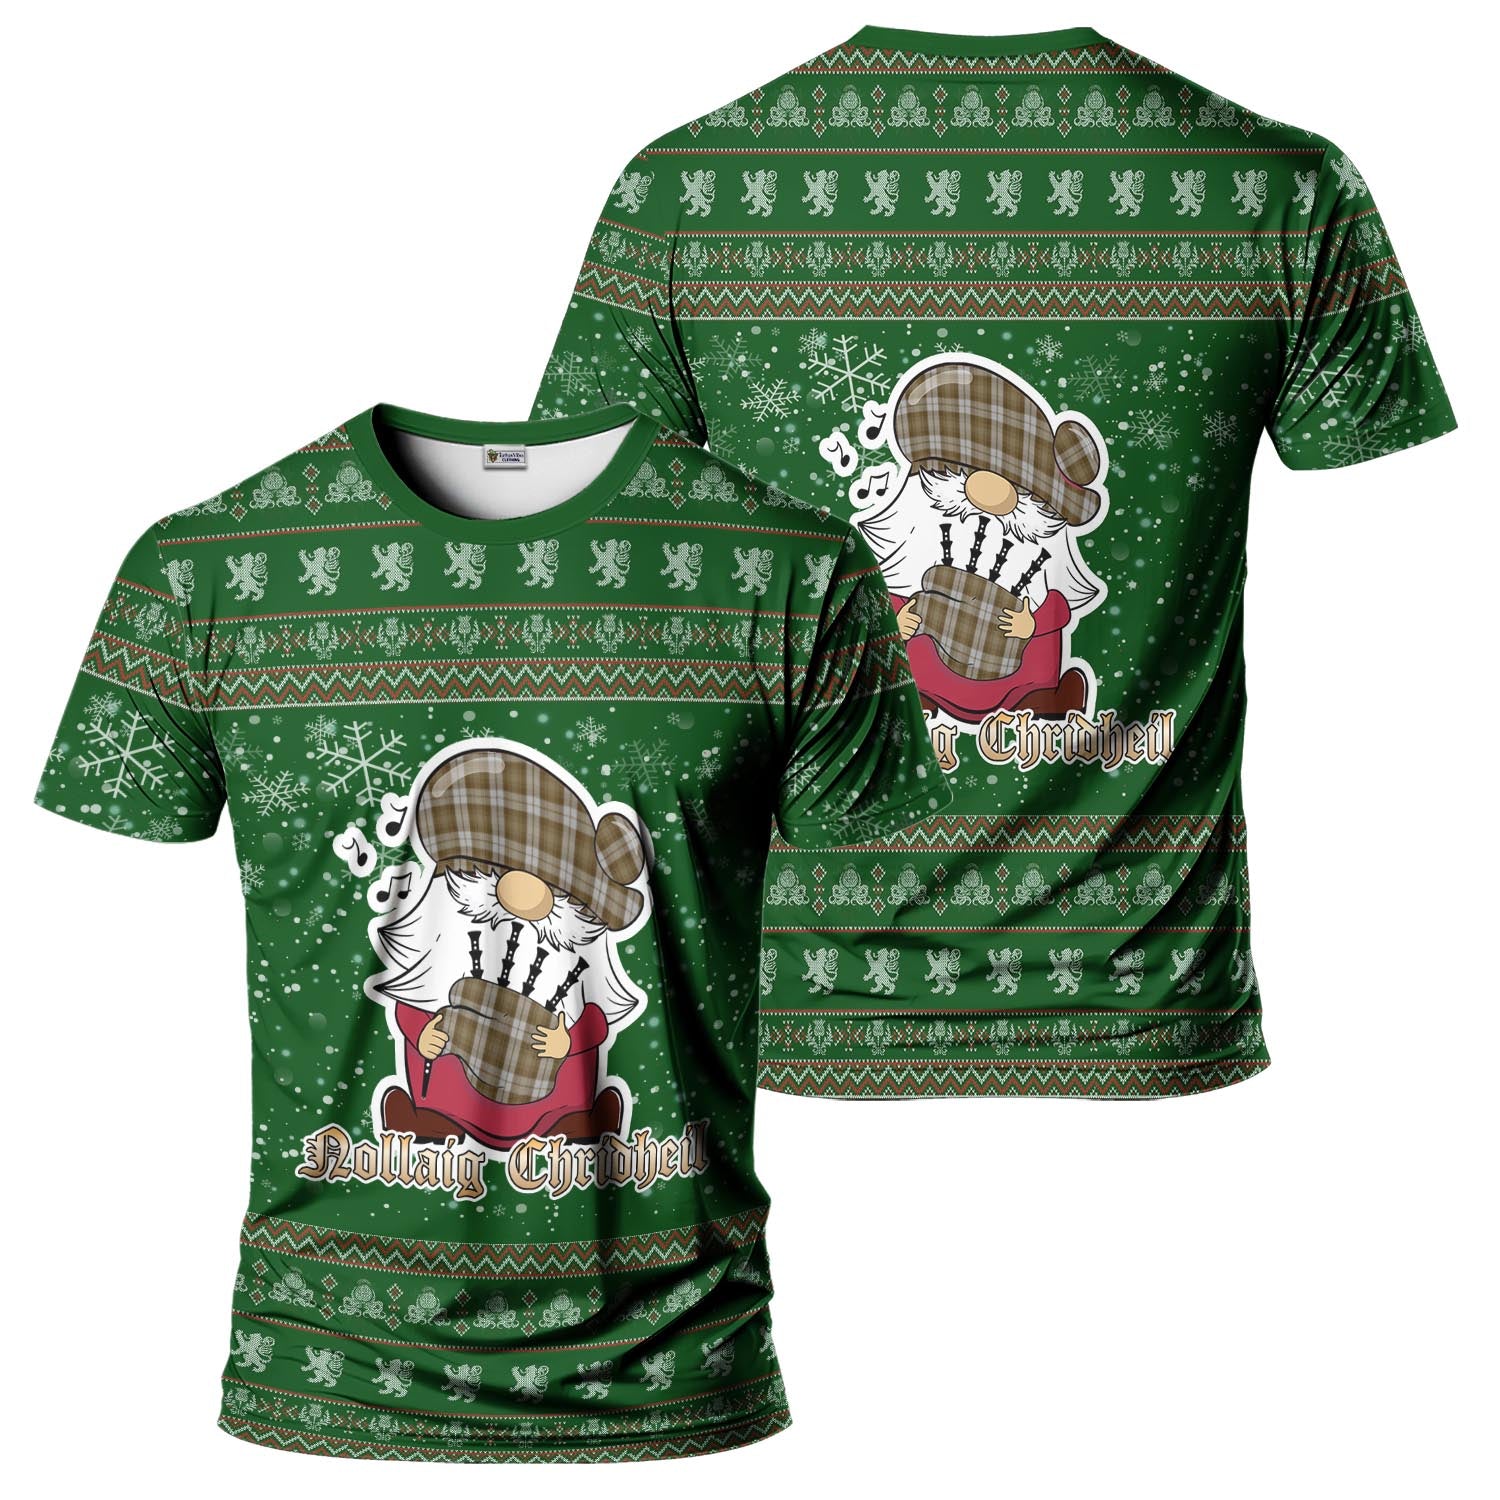 Baillie Dress Clan Christmas Family T-Shirt with Funny Gnome Playing Bagpipes Men's Shirt Green - Tartanvibesclothing